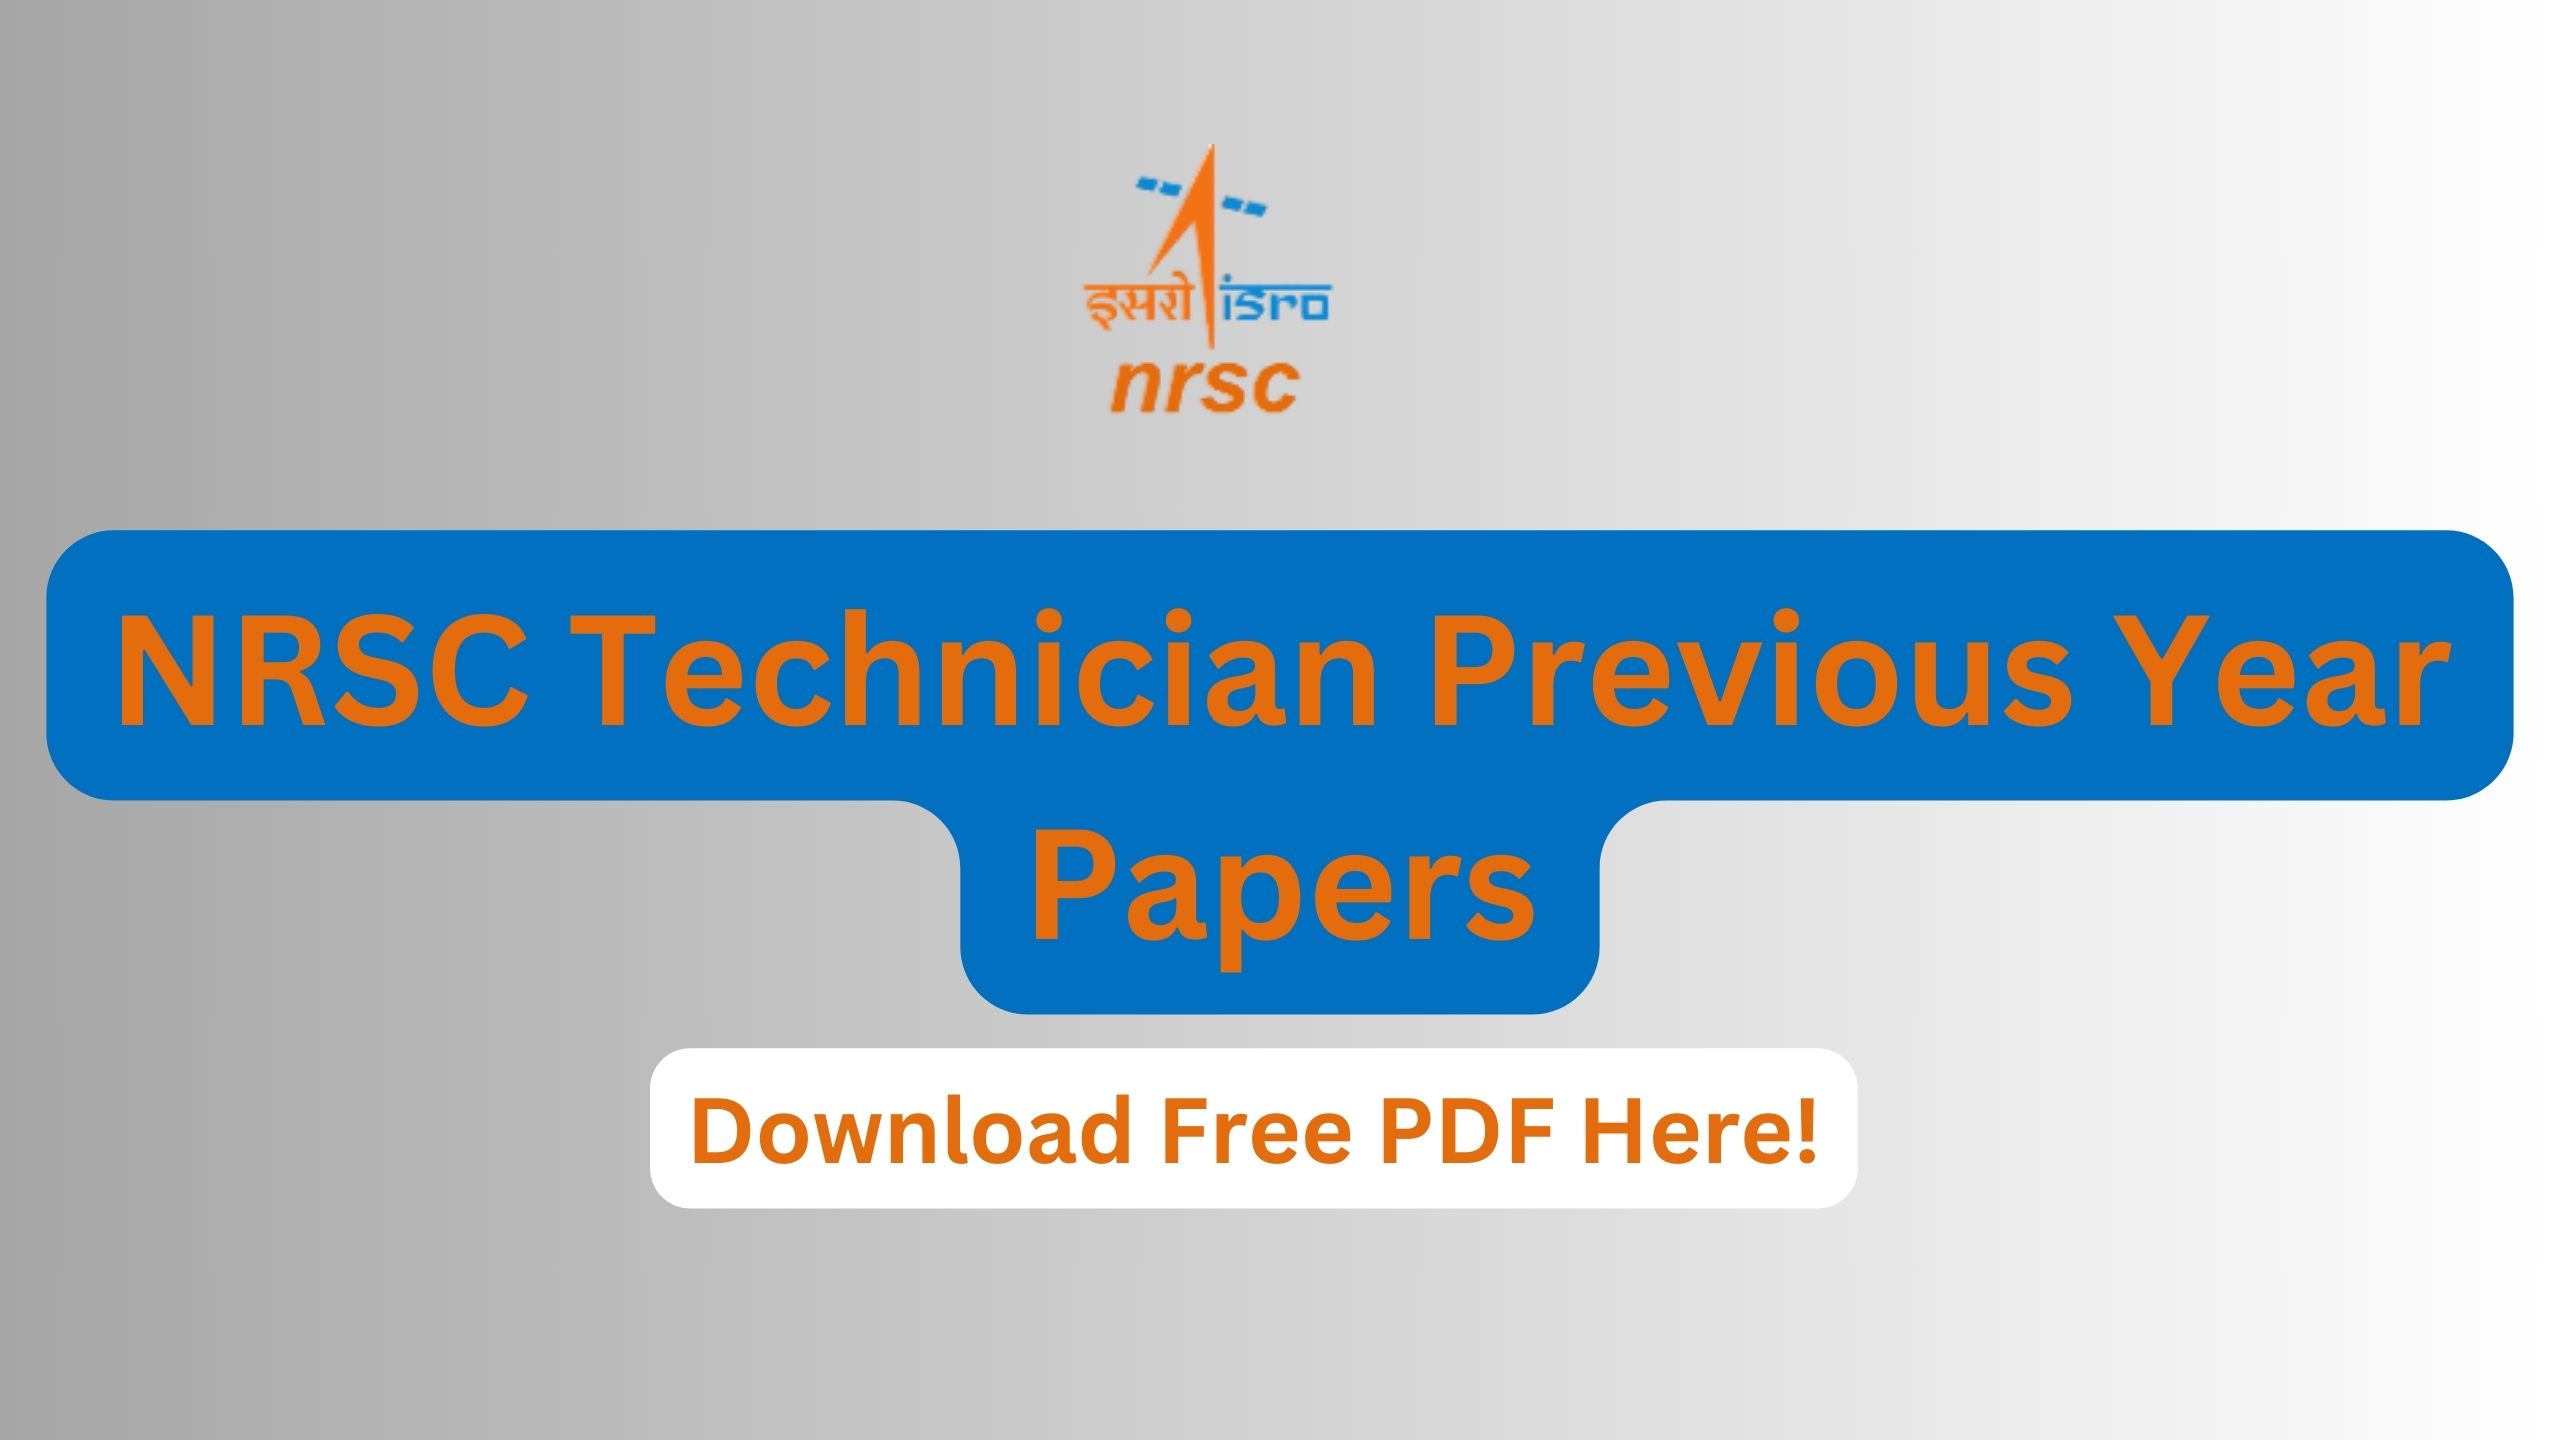 NRSC Technician Previous Year Papers